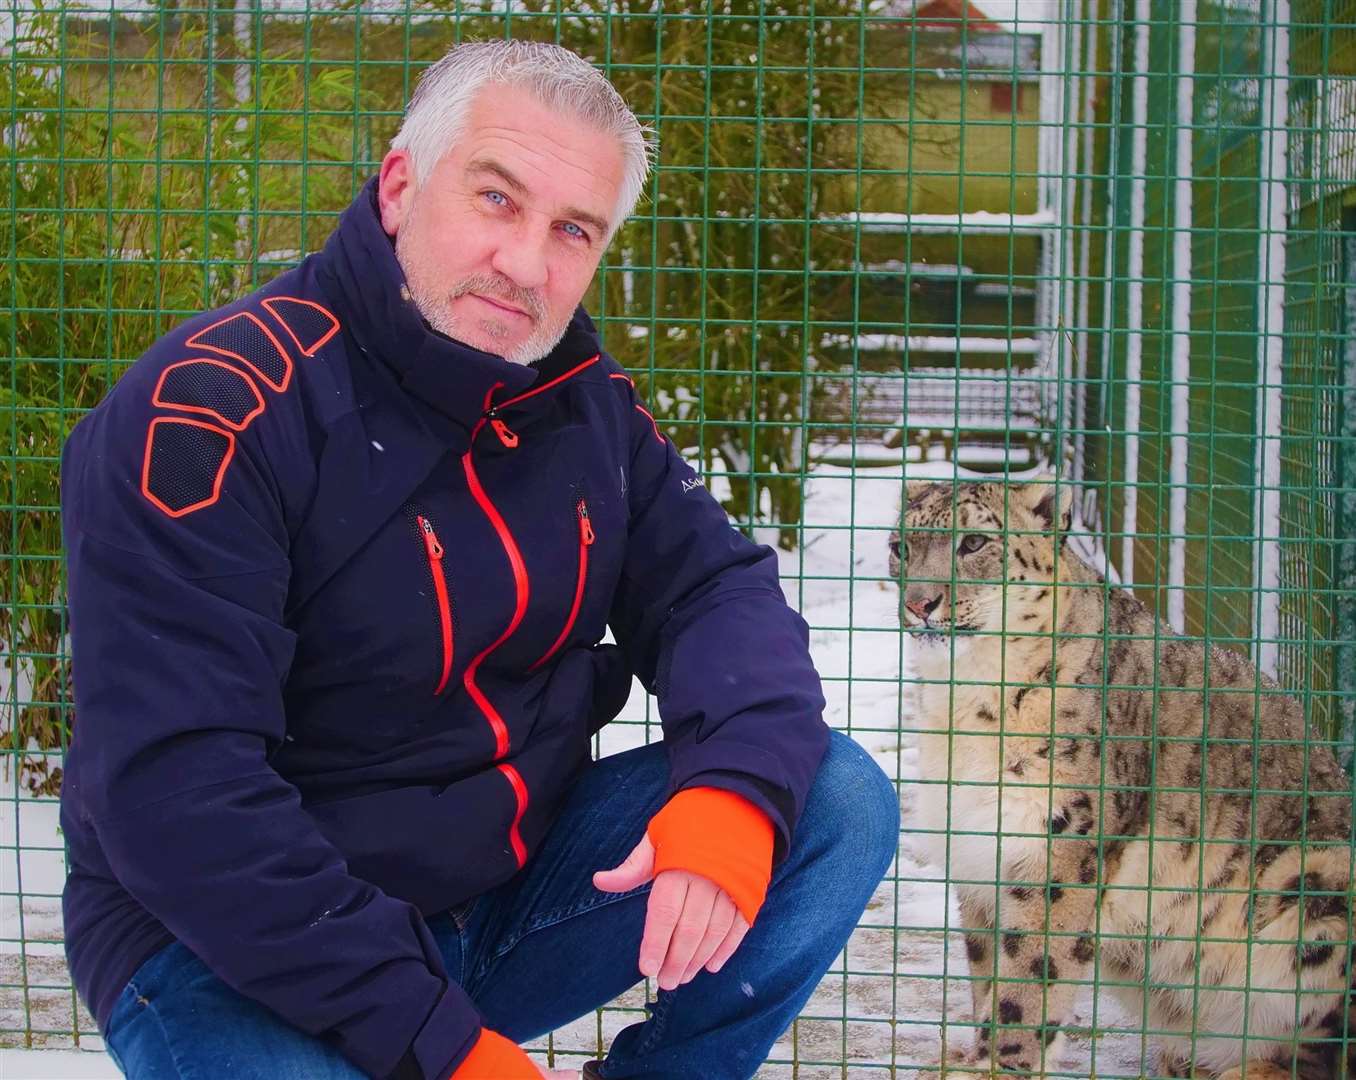 Bake Off star Paul Hollywood at the Big Cat Sanctuary in Smarden with Laila the Snow Leopard